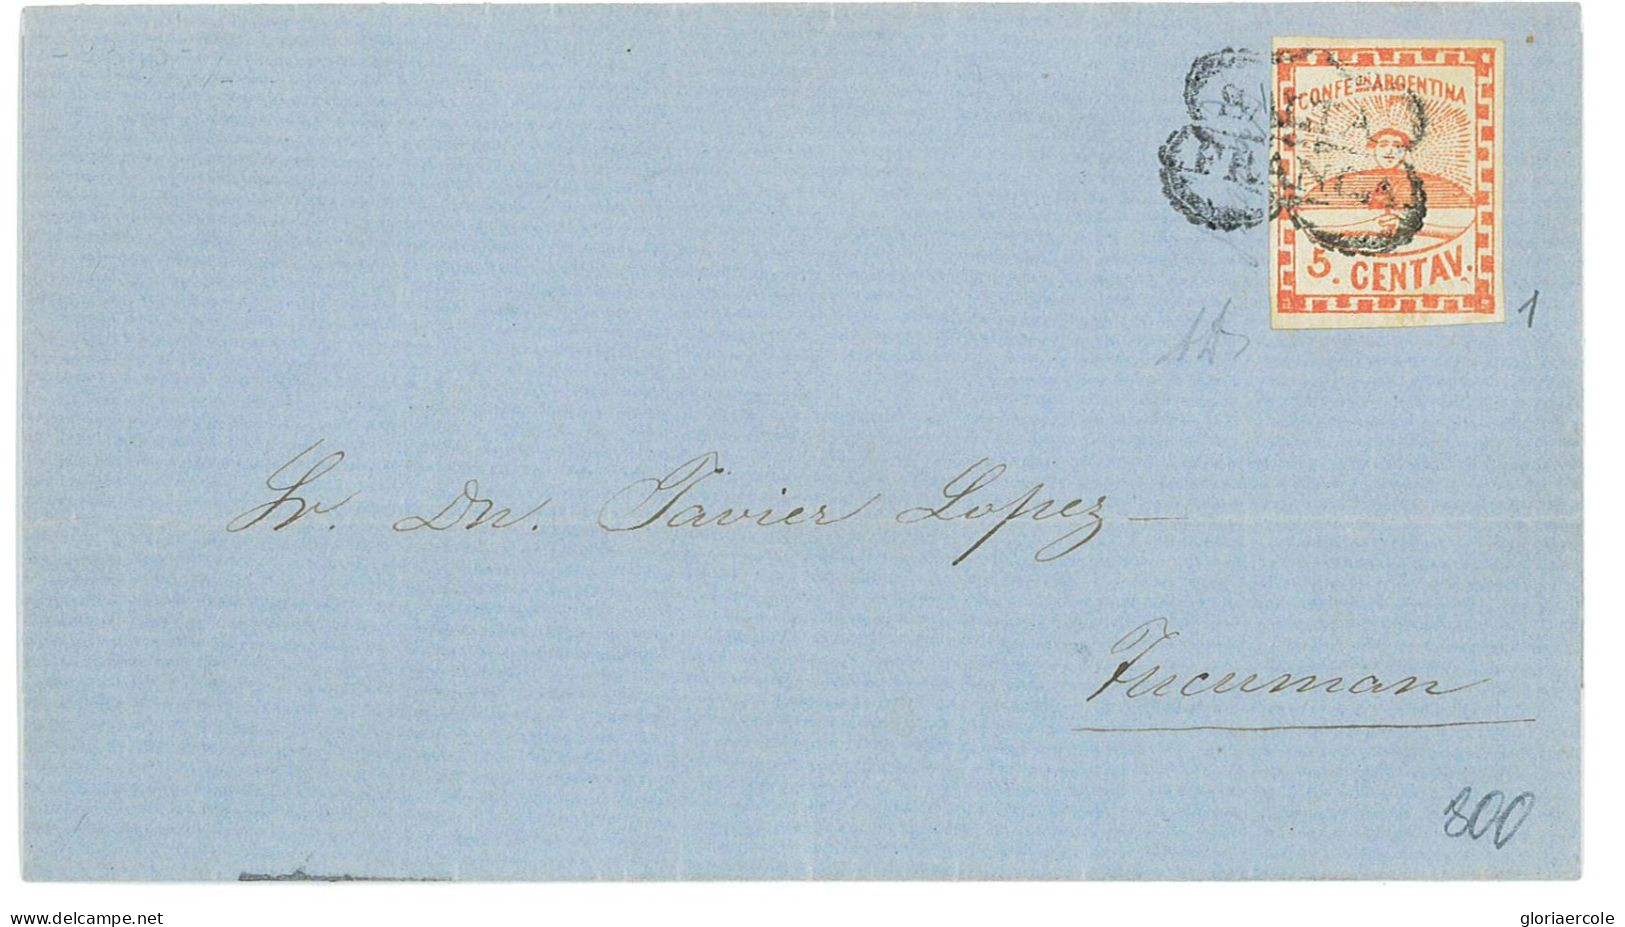 P2849 - CONFEDERACION ARGENTINA , G.J. NR. 1 D (2 POINTS AFTER V) ON FOLDED LETTER. FROM SALTA TO TUCUMÁN - Cartas